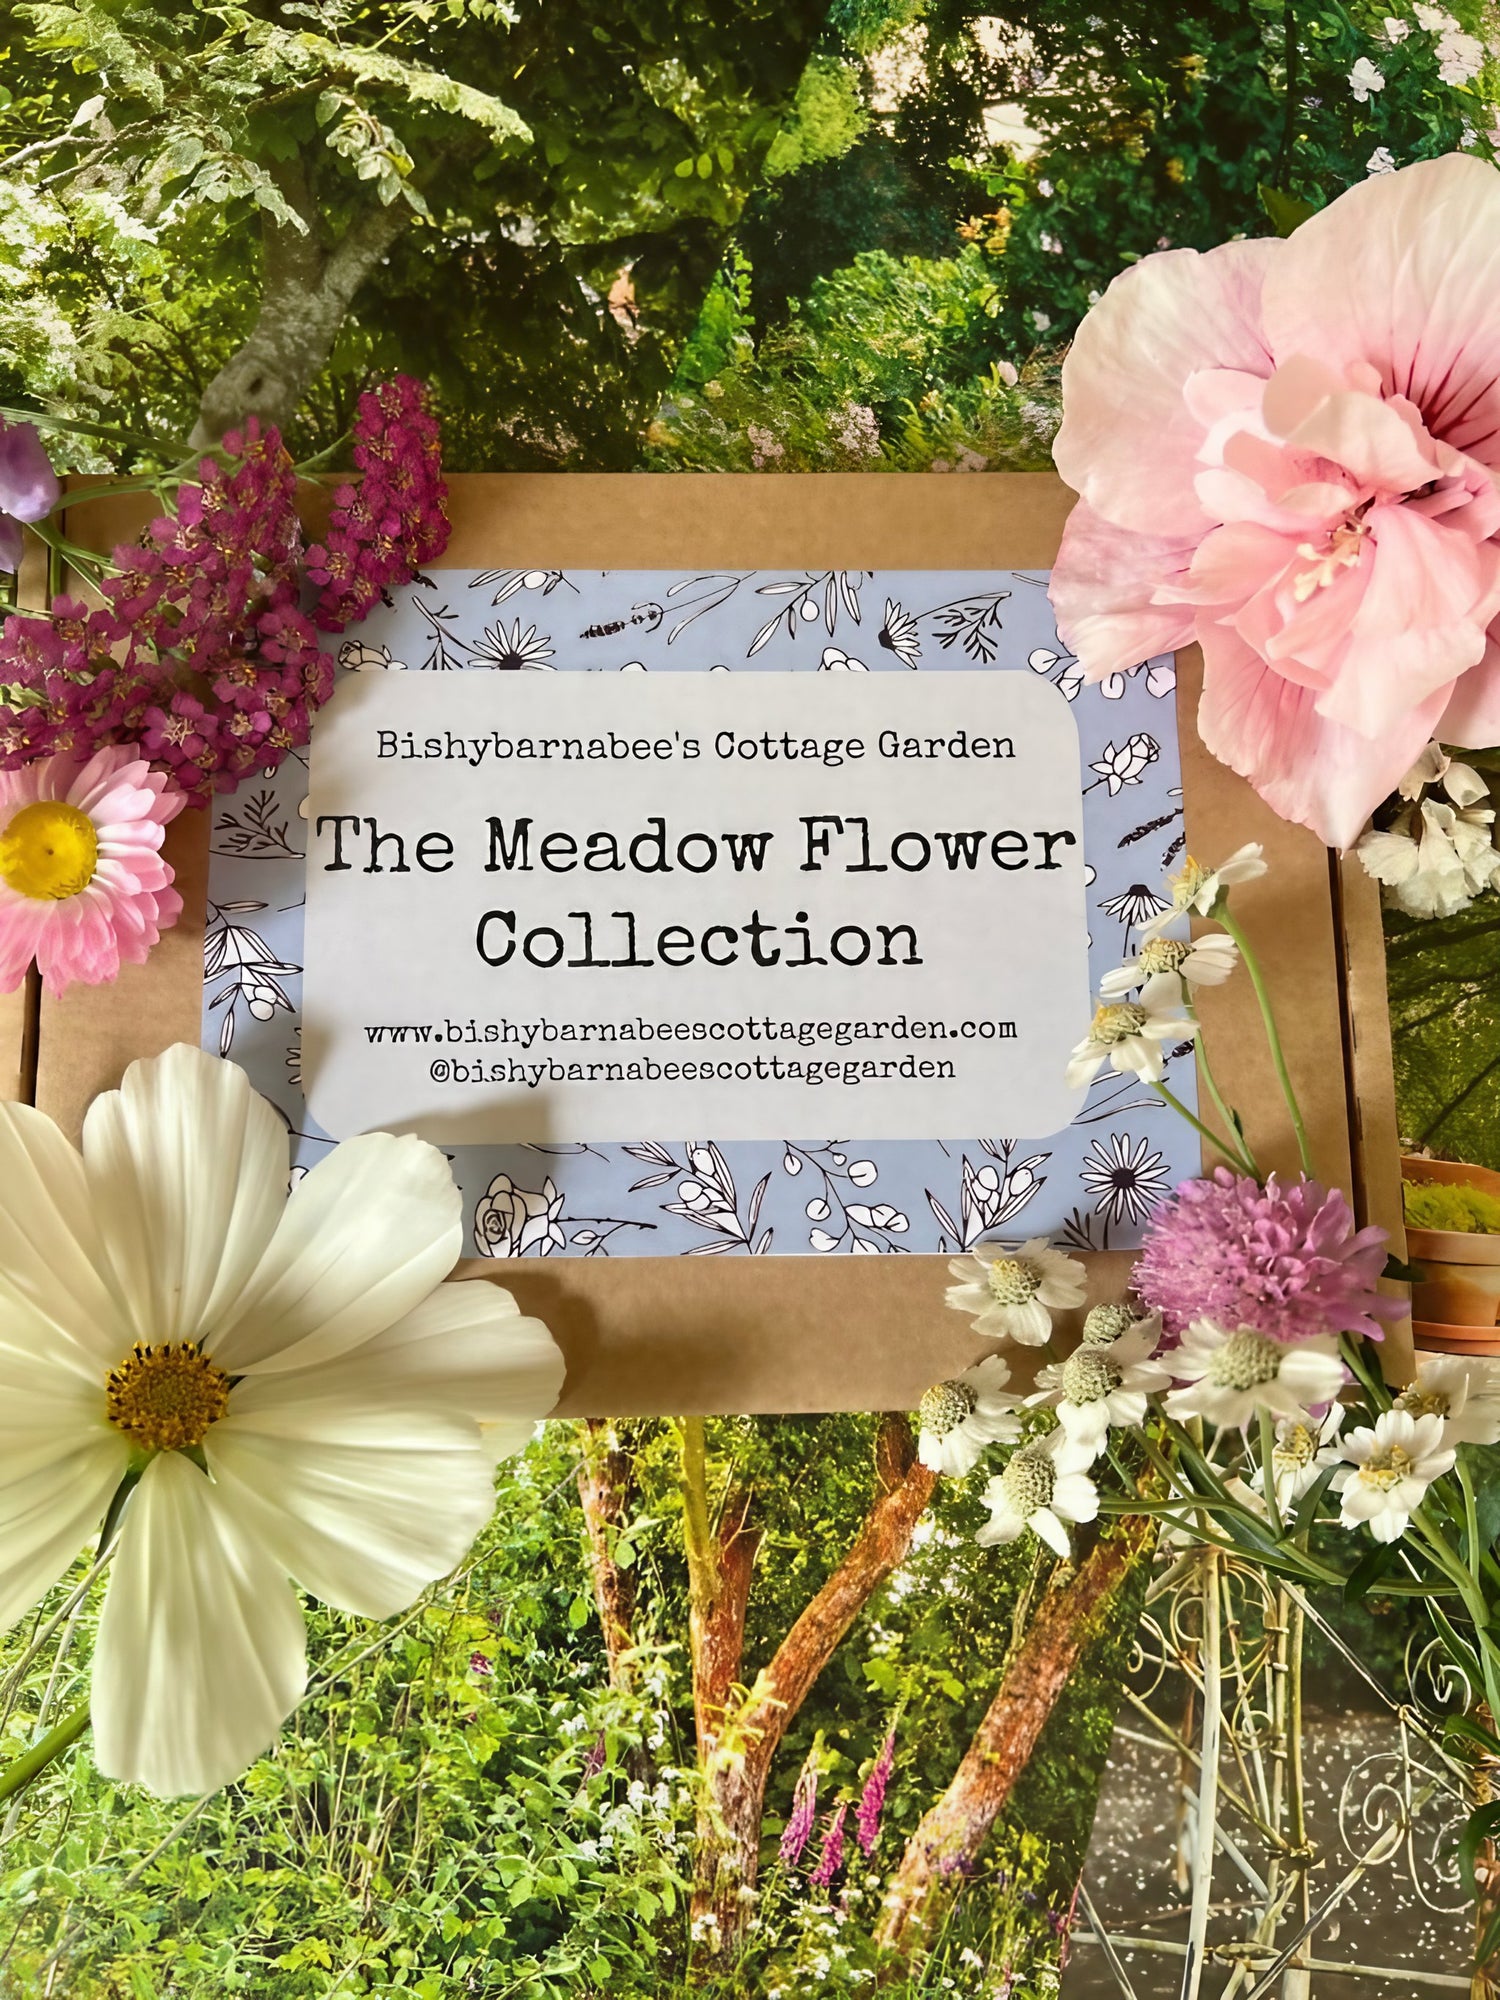 The Meadow Flower Collection